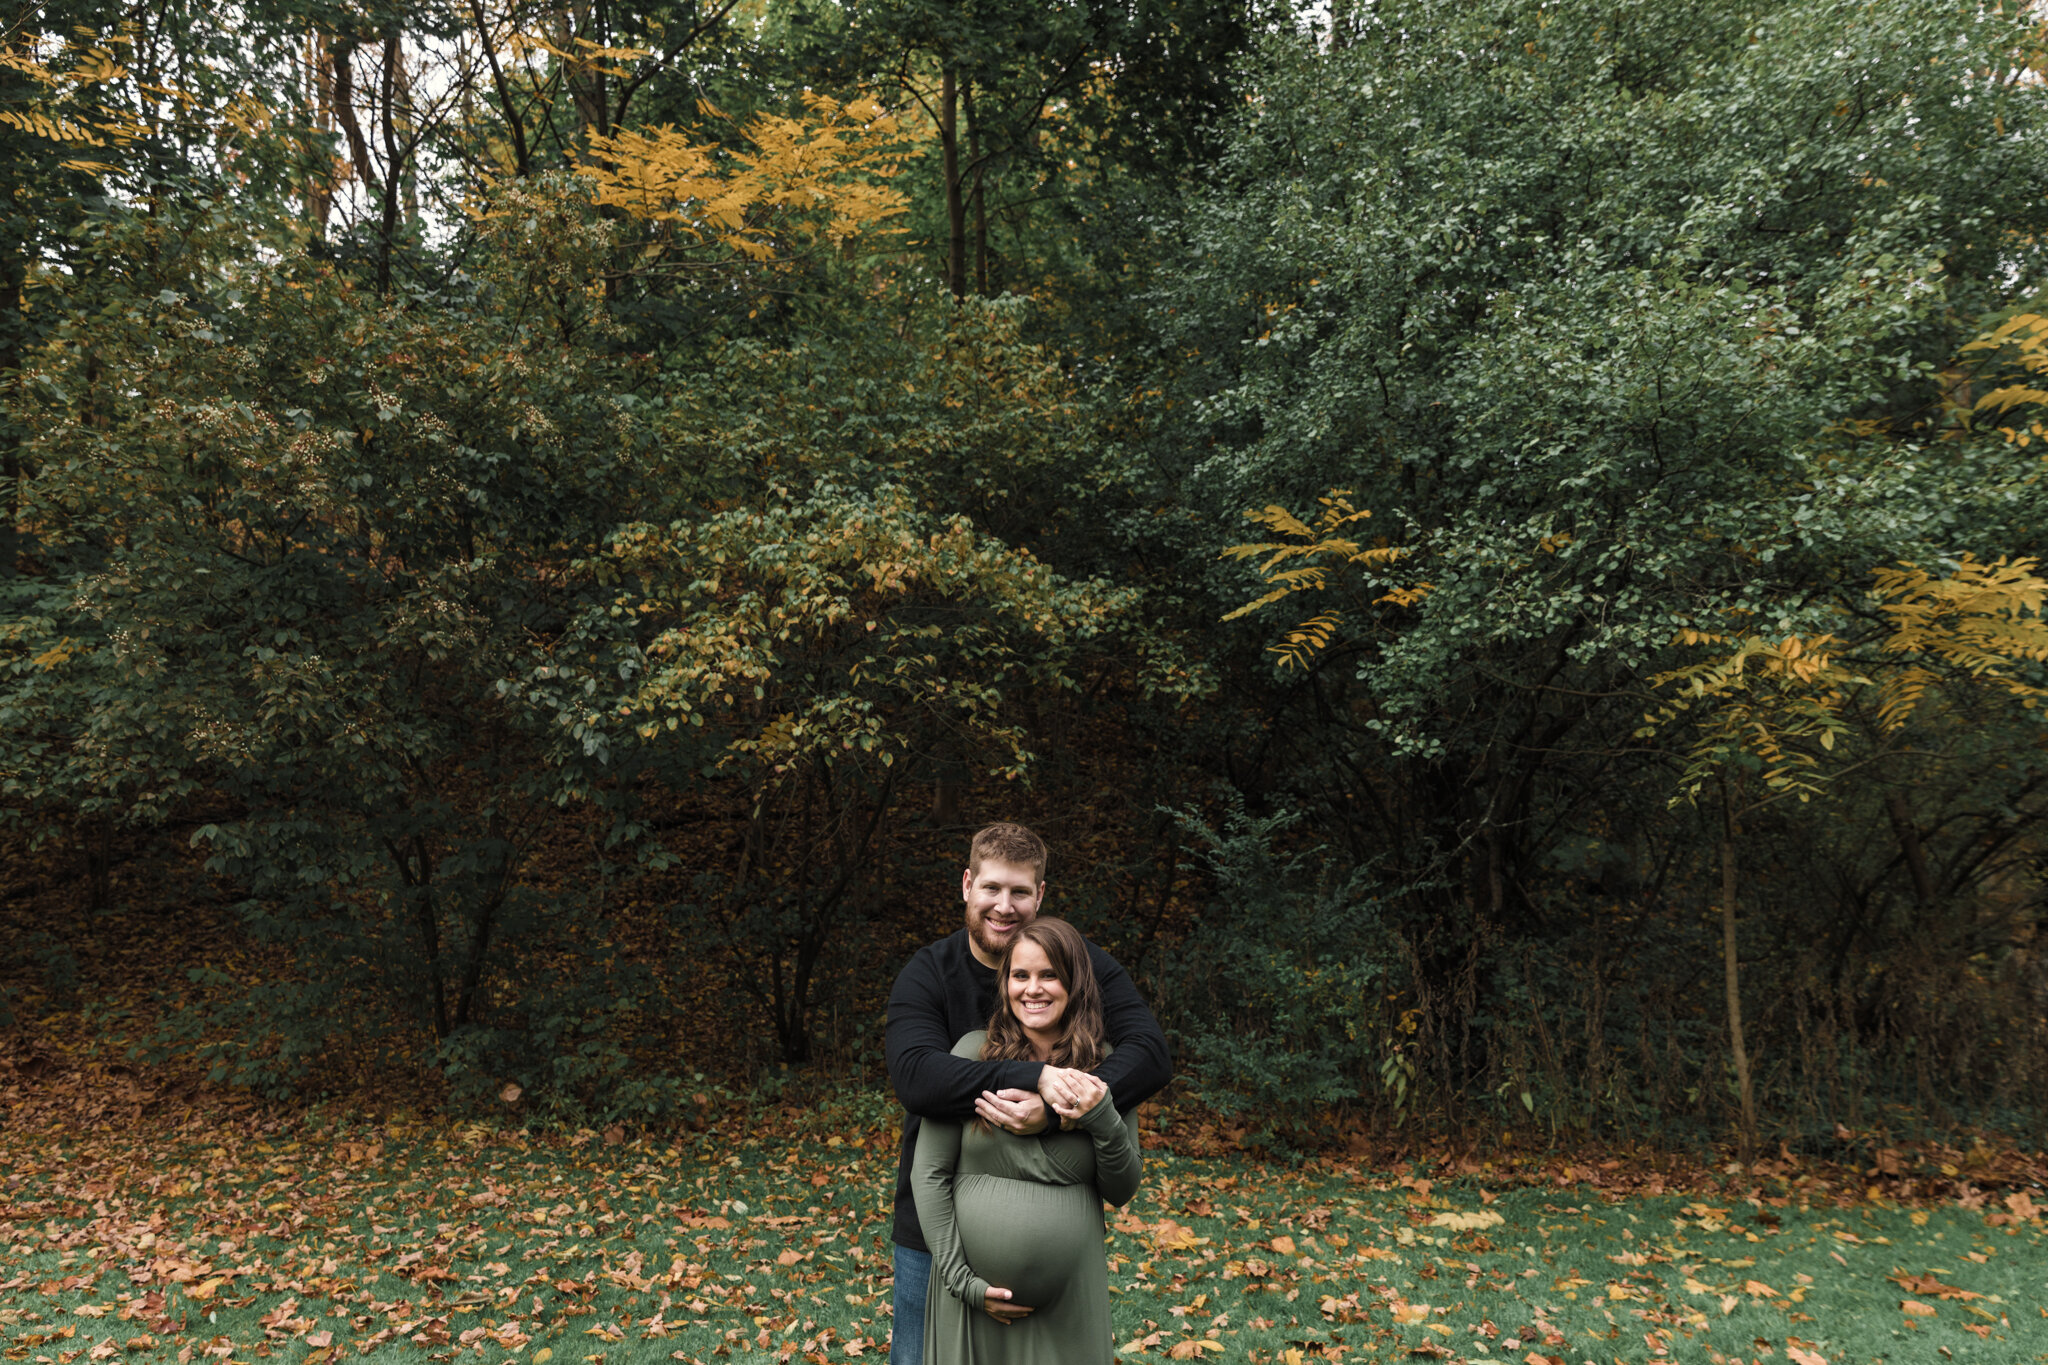 Mill_Creek_Park_Maternity_Session_Jewel_Tone_Fall_Colors_Family_of_Three_Big_Sister_Little_Brother_Maternity_Session_by_Baby_and_Family_Photographer_Christie_Leigh_Photo_in_Mahoning_County_OH-15.JPG